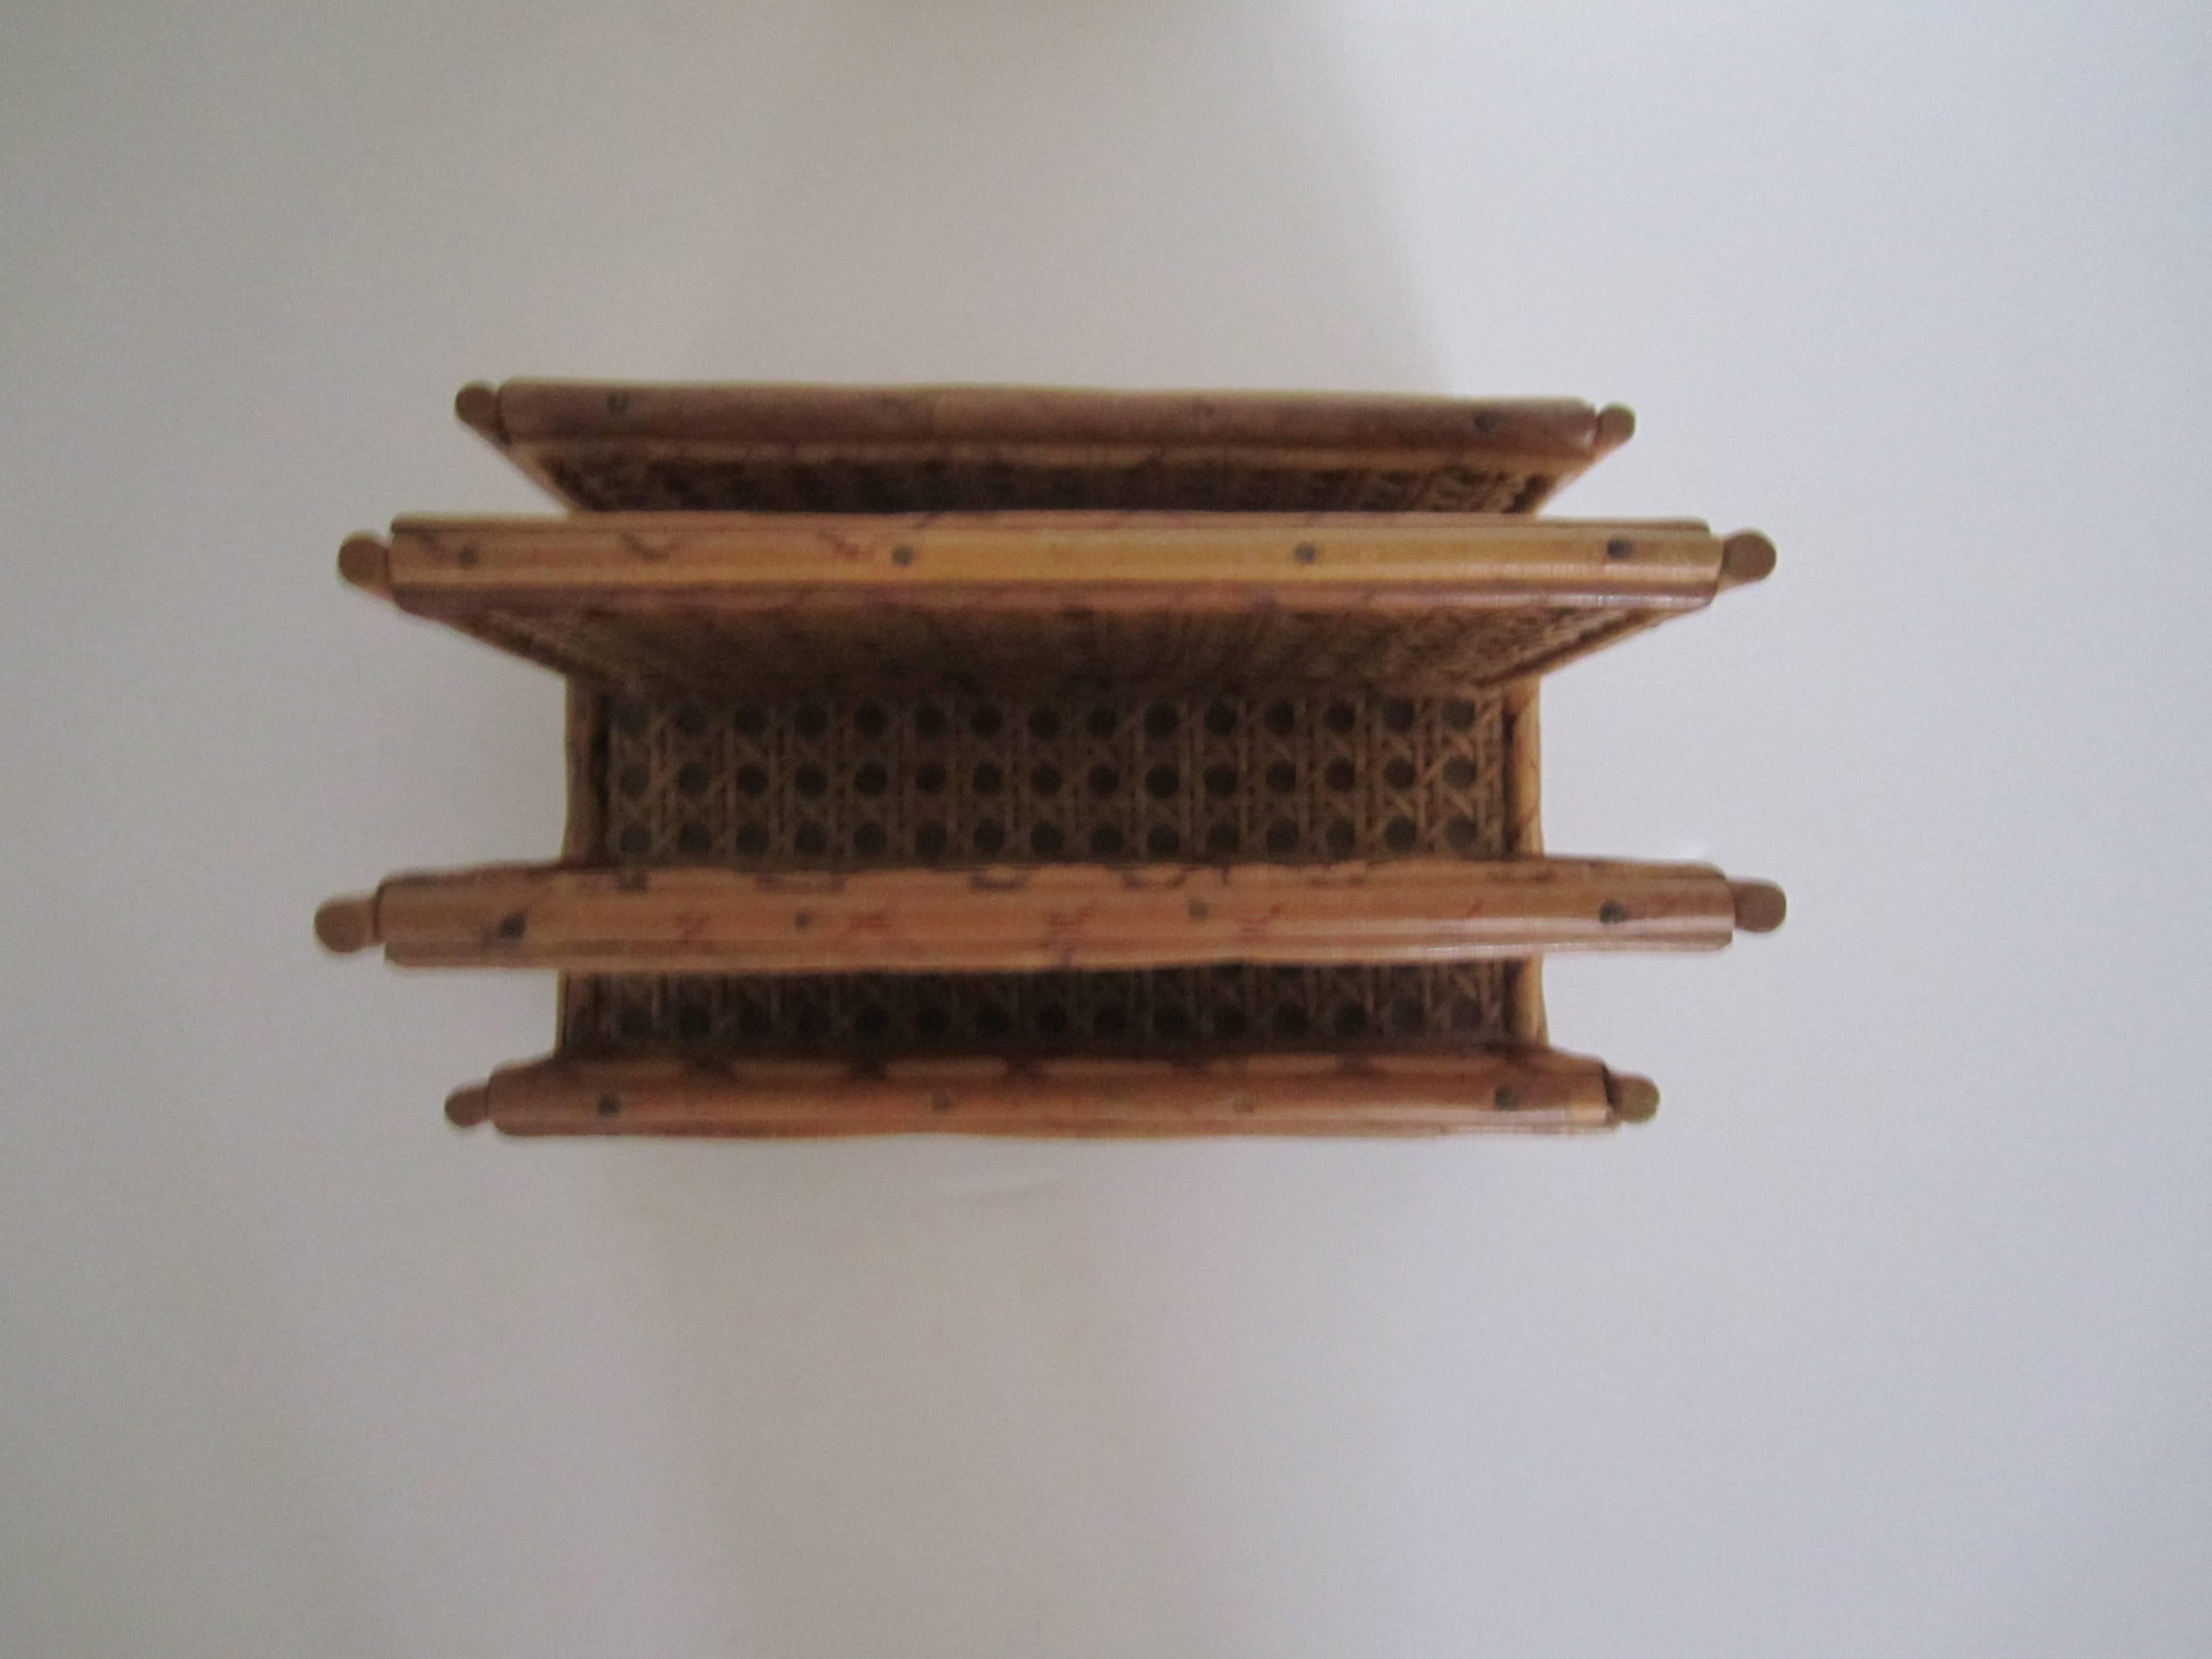 American Vintage Bamboo and Rattan Letter Holder or Desk Organizer, 1970s